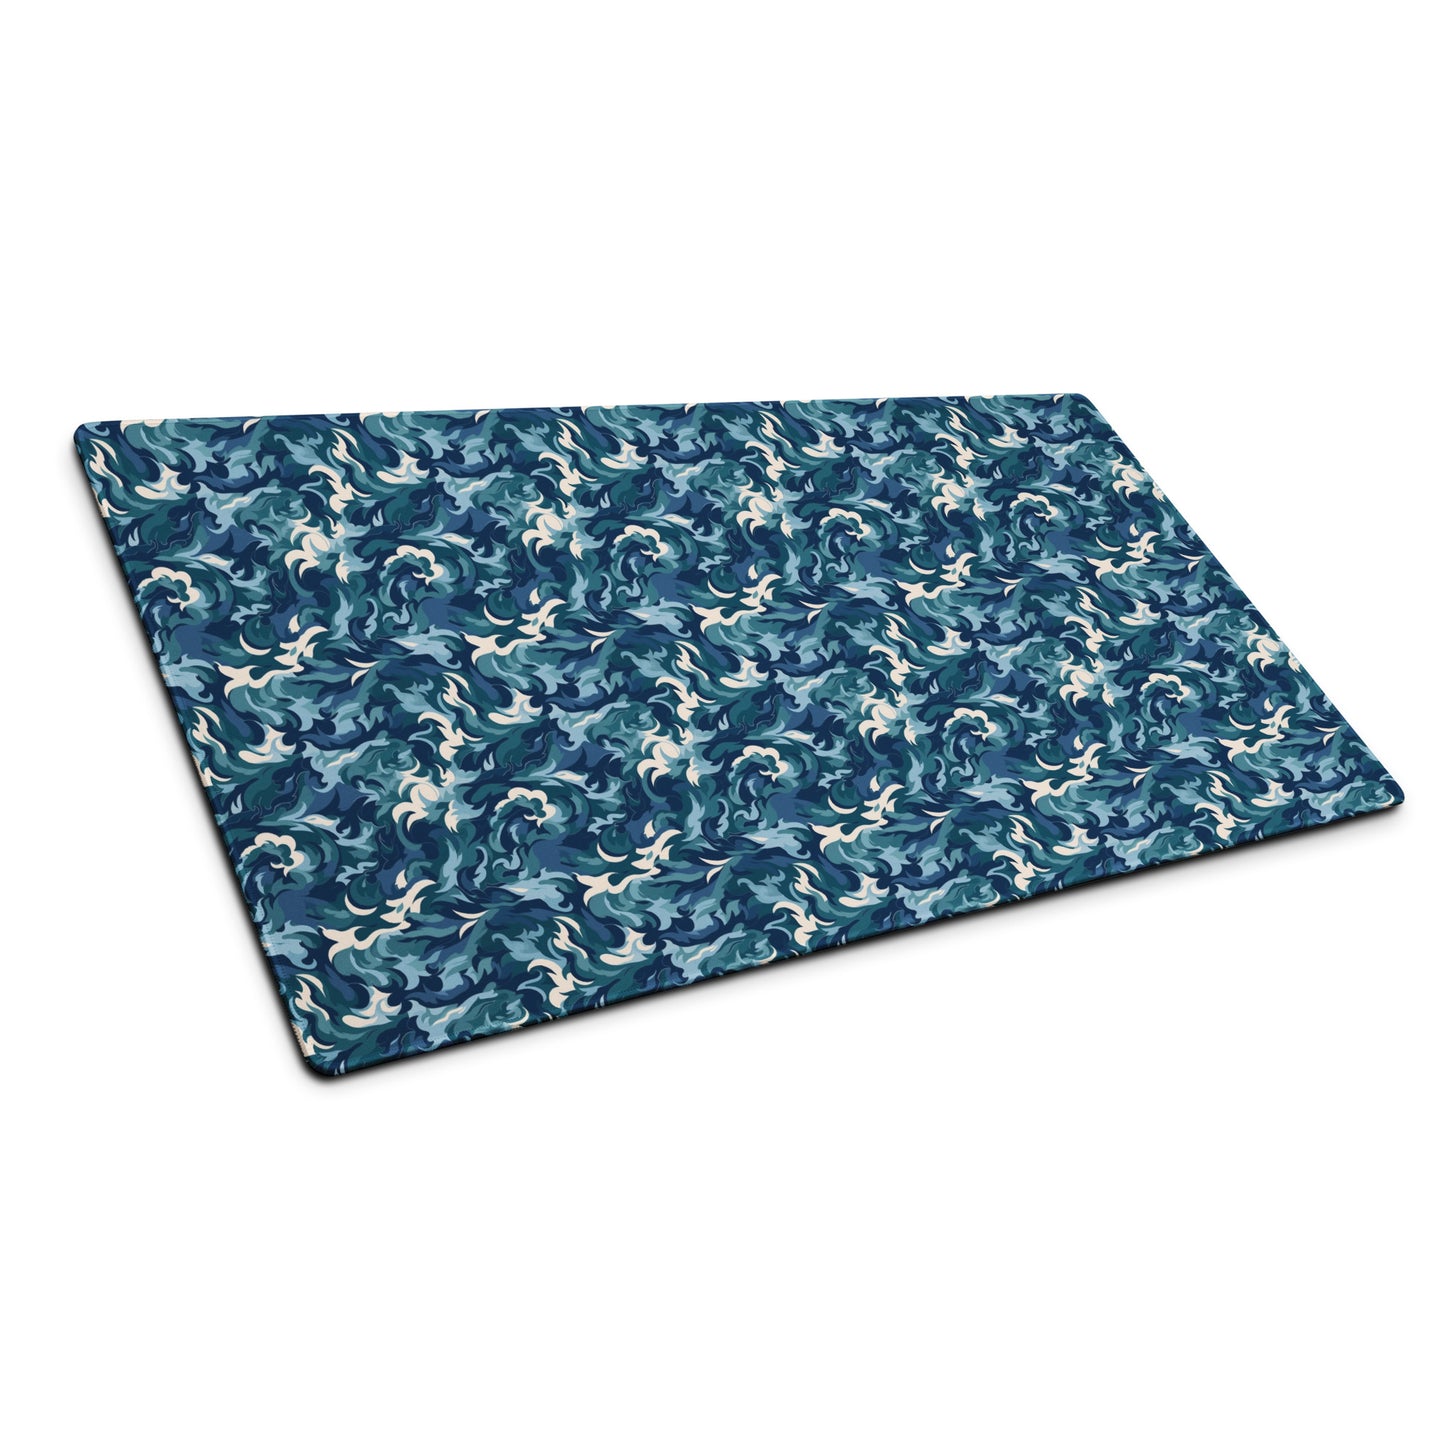 A 36" x 18" desk pad with a teal and white camo pattern sitting at an angle.